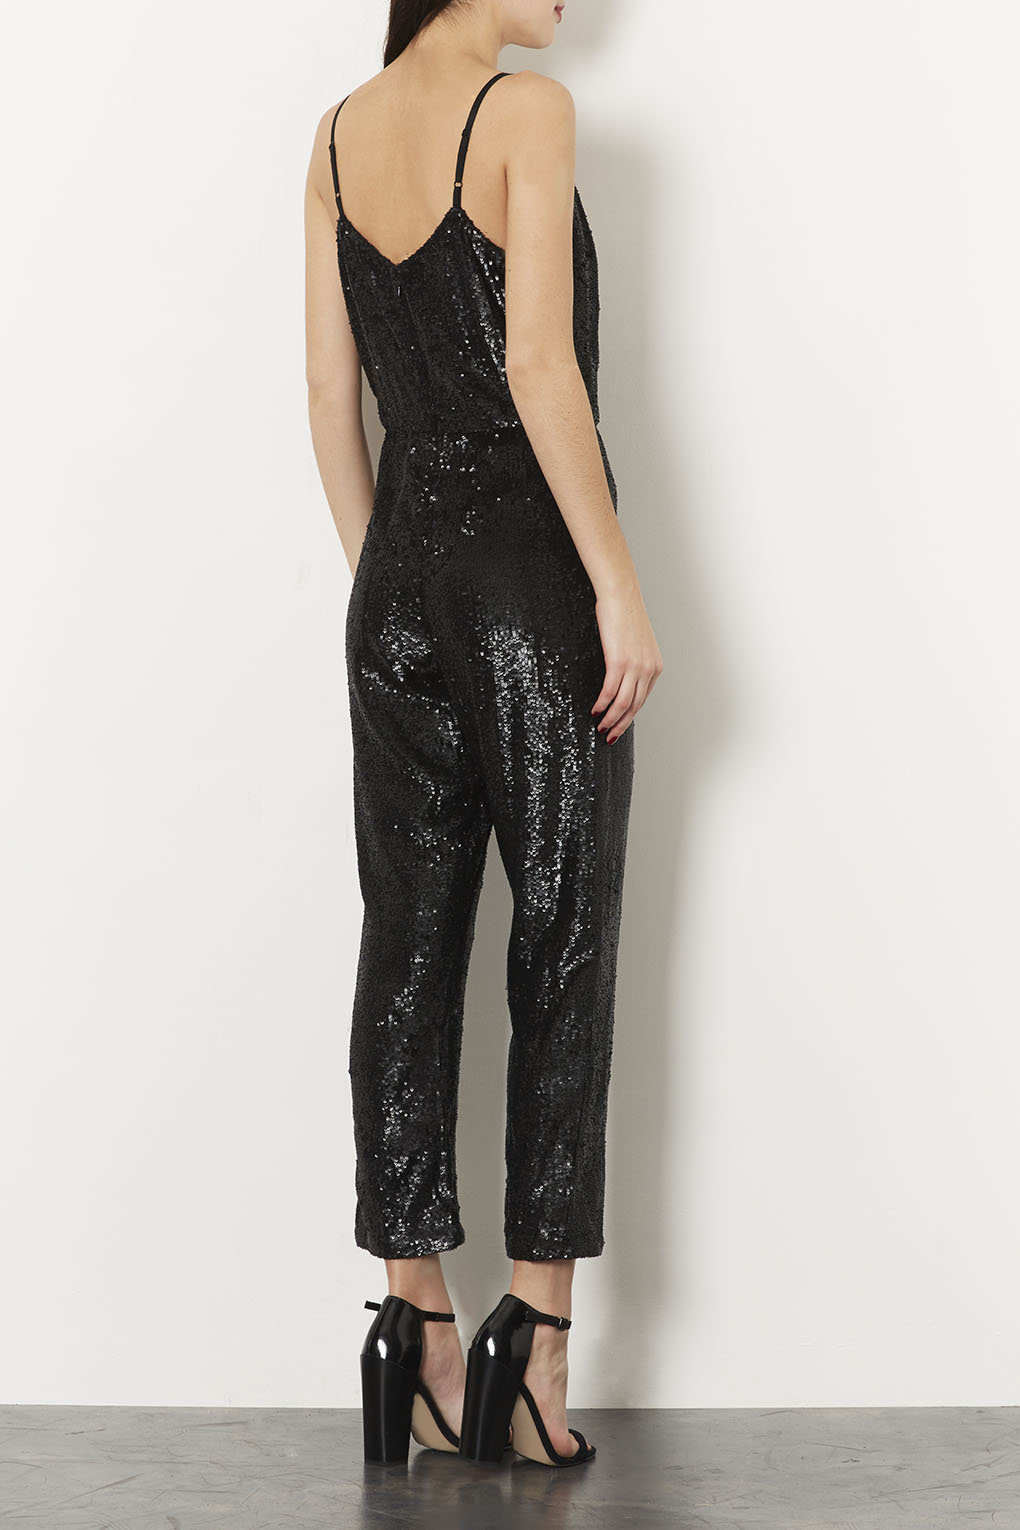 TOPSHOP Sequin Strappy Jumpsuit in Black - Lyst